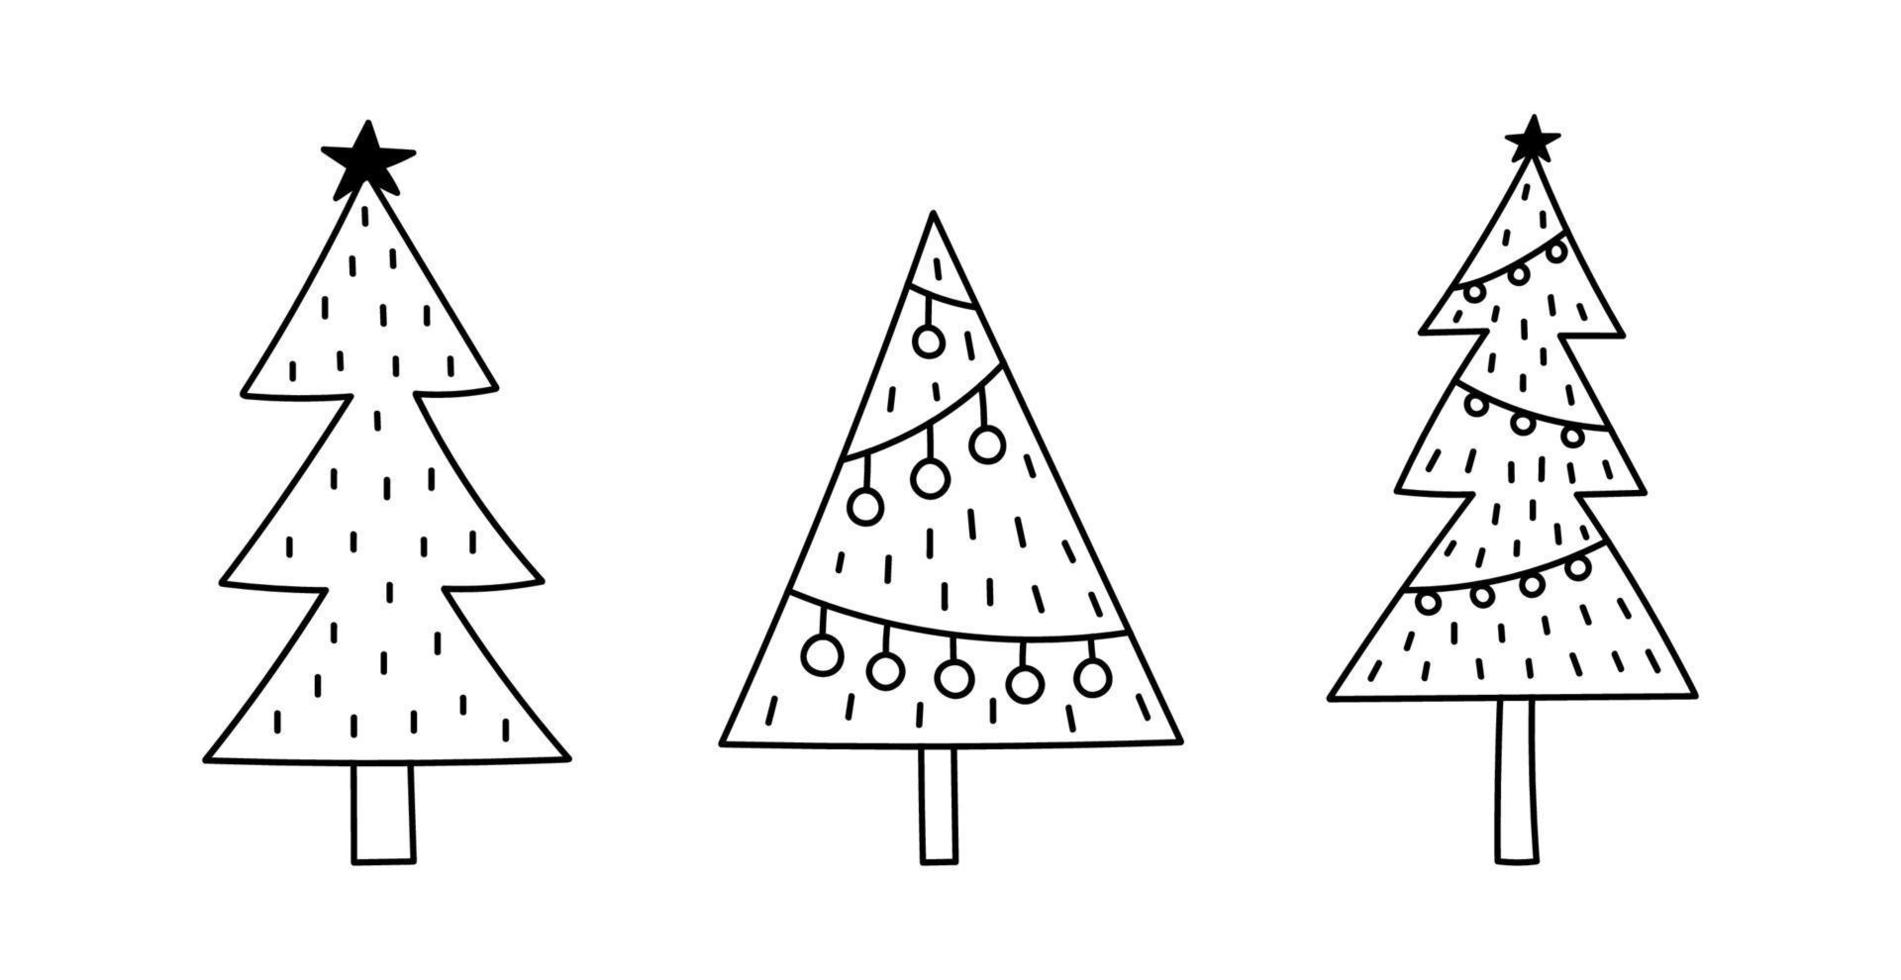 Set of cute decorated Christmas trees isolated on white background. Vector hand-drawn illustration in doodle style. Perfect for holiday designs, cards, decorations, logo, invitations.